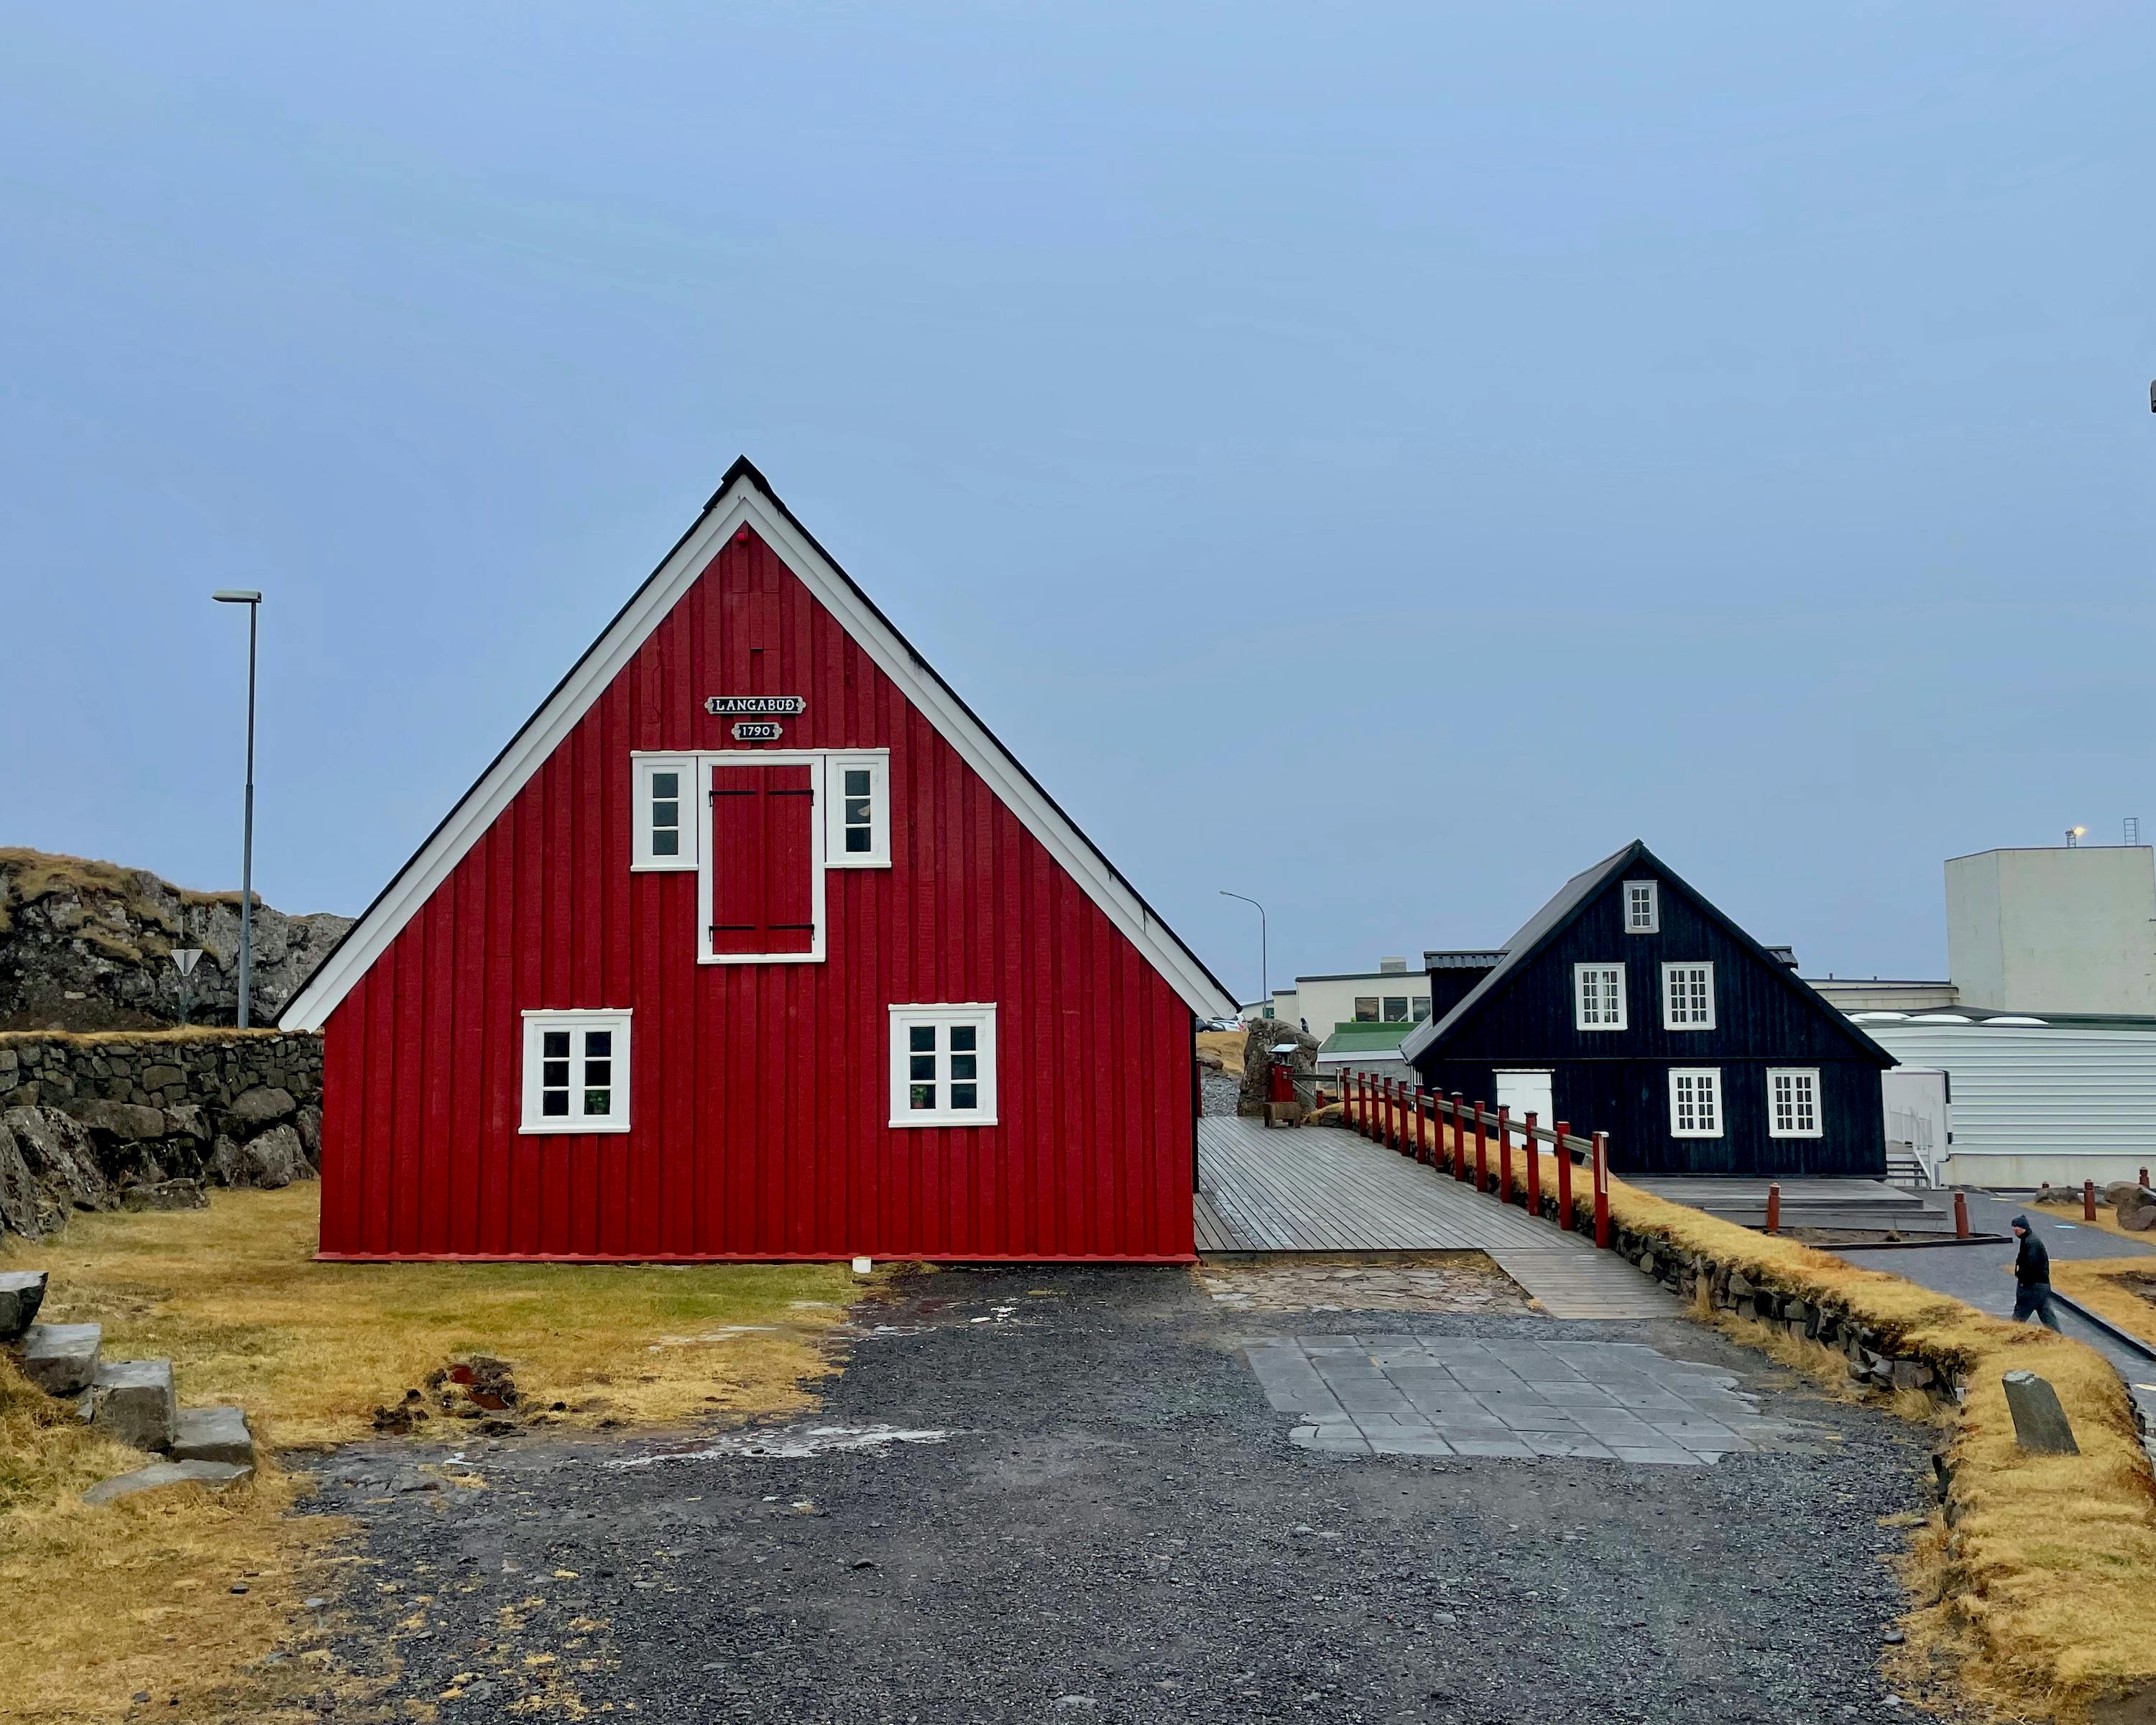 Two red and black A-shaped old style wooden houses